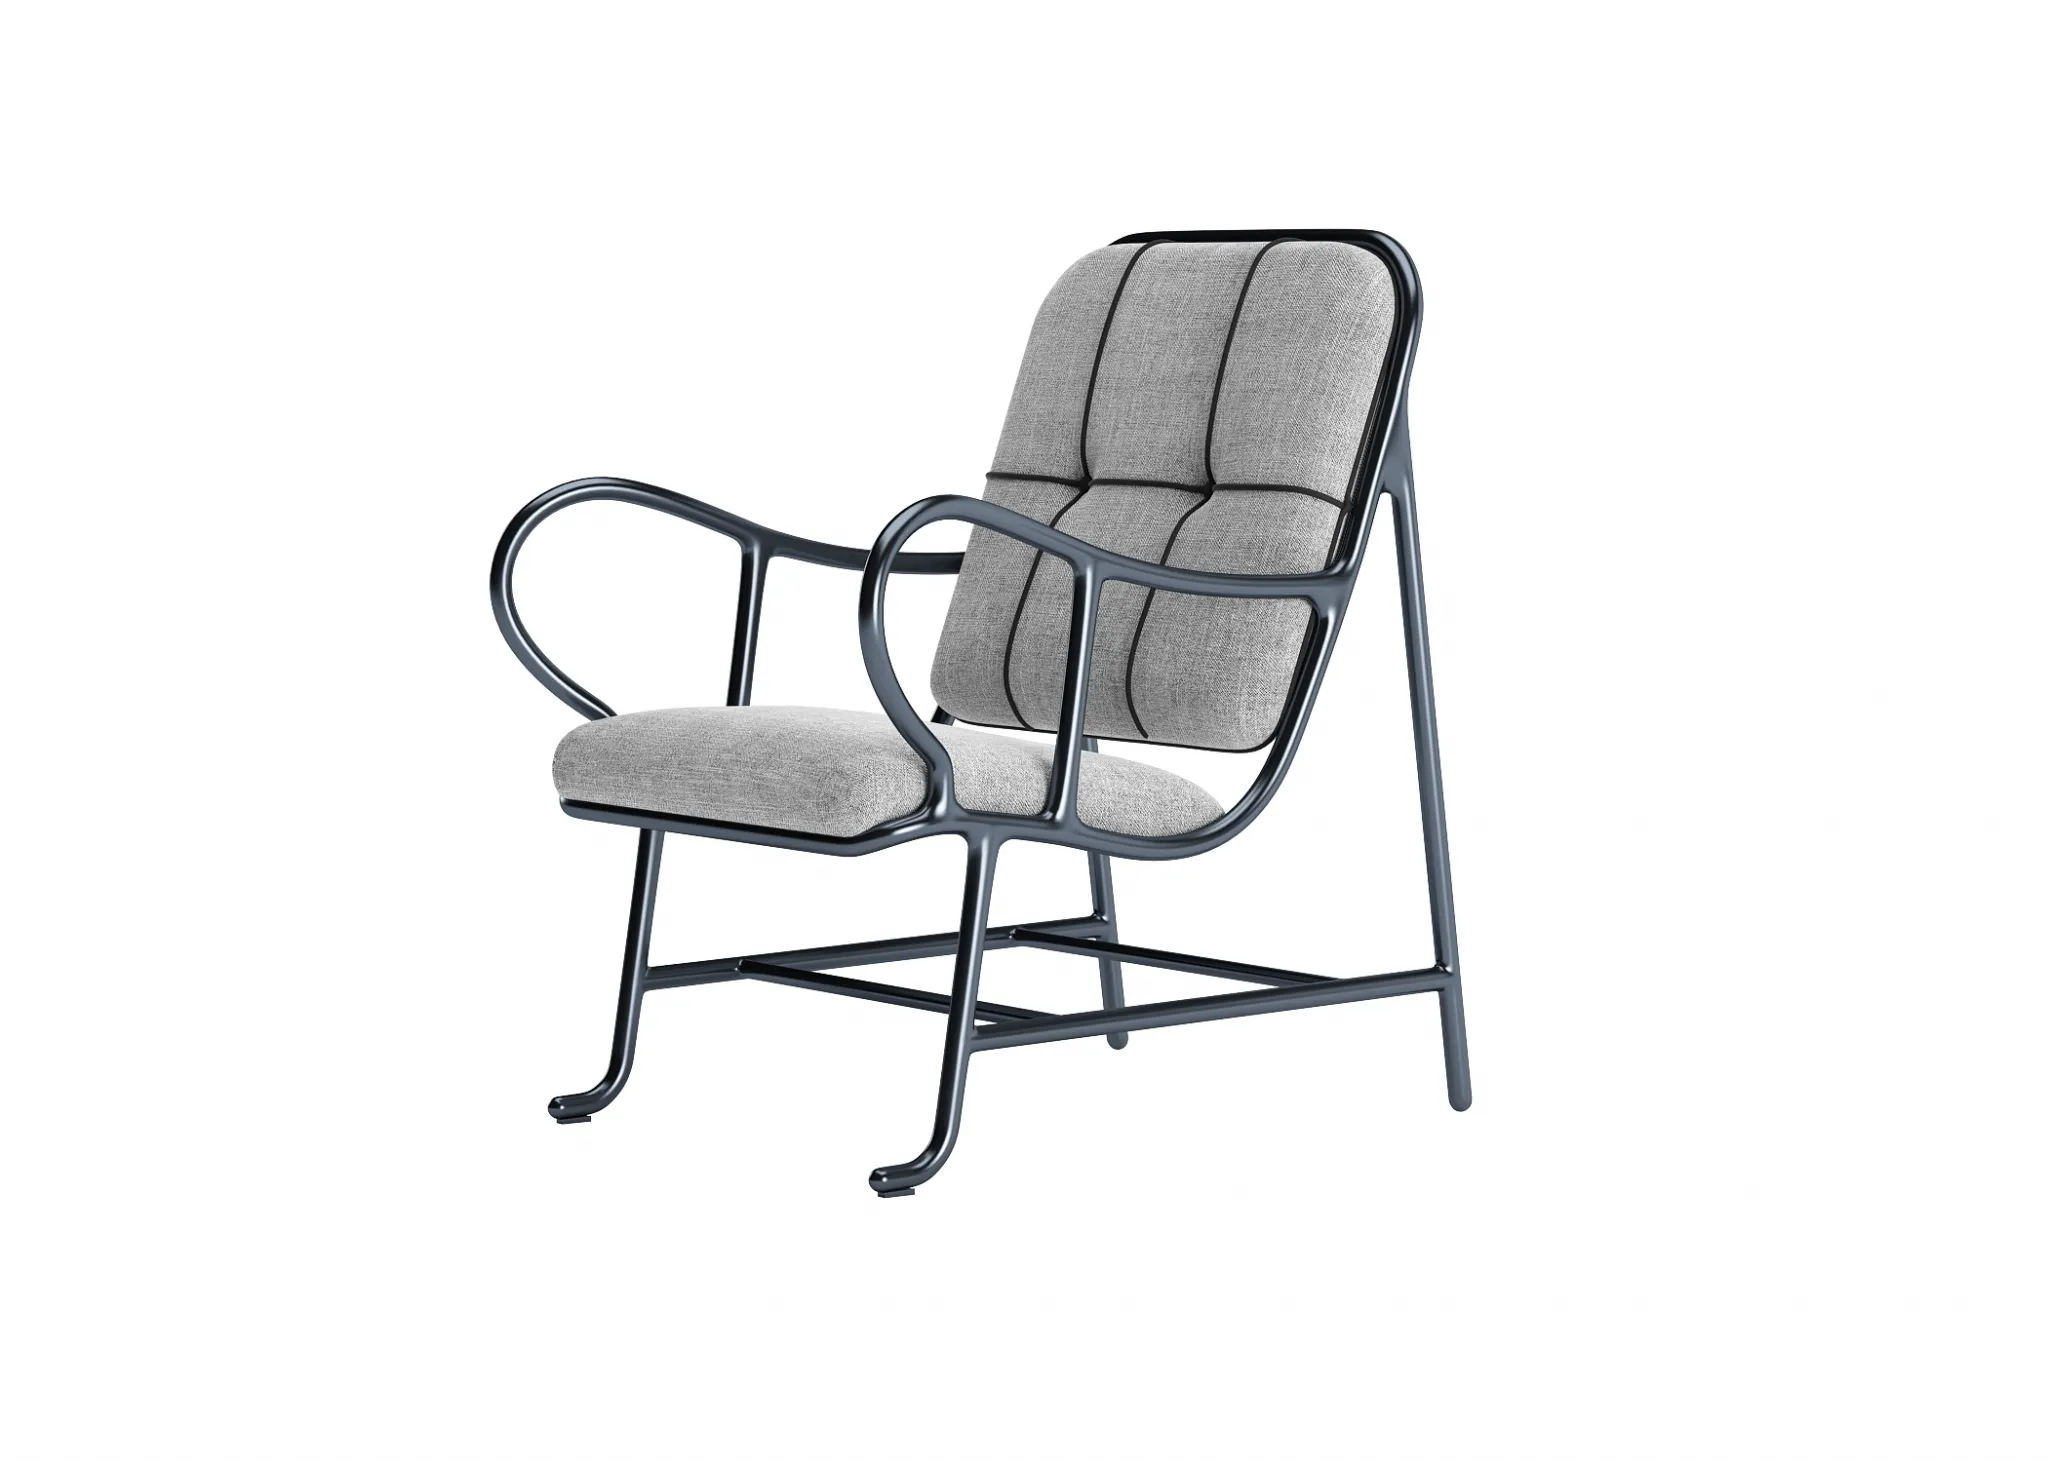 FURNITURE 3D MODELS – CHAIRS – 0135